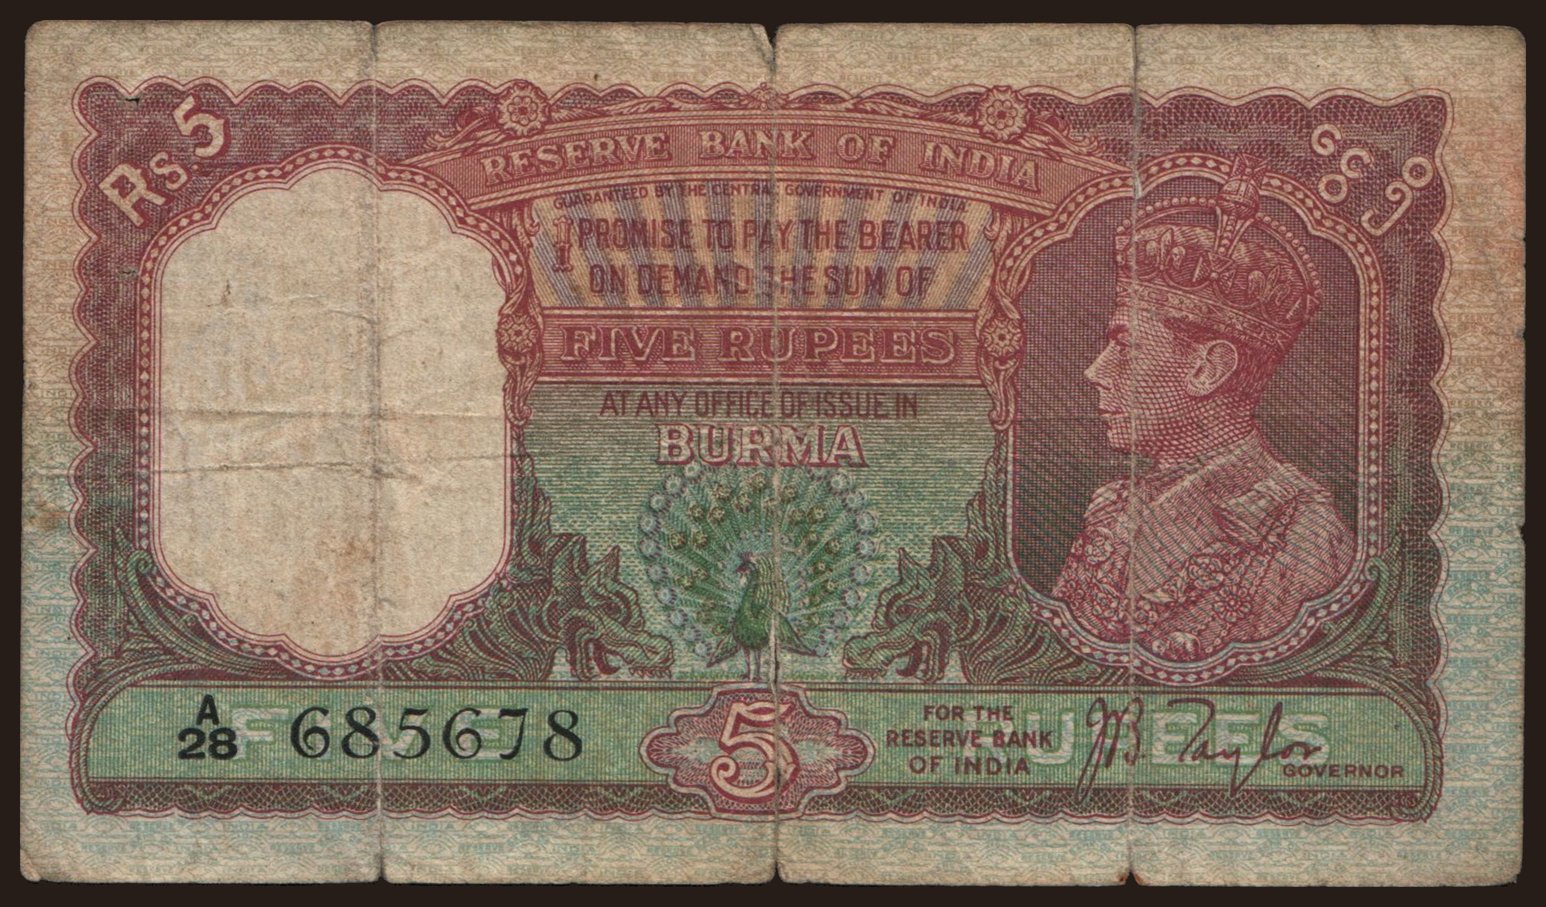 5 rupees, 1938